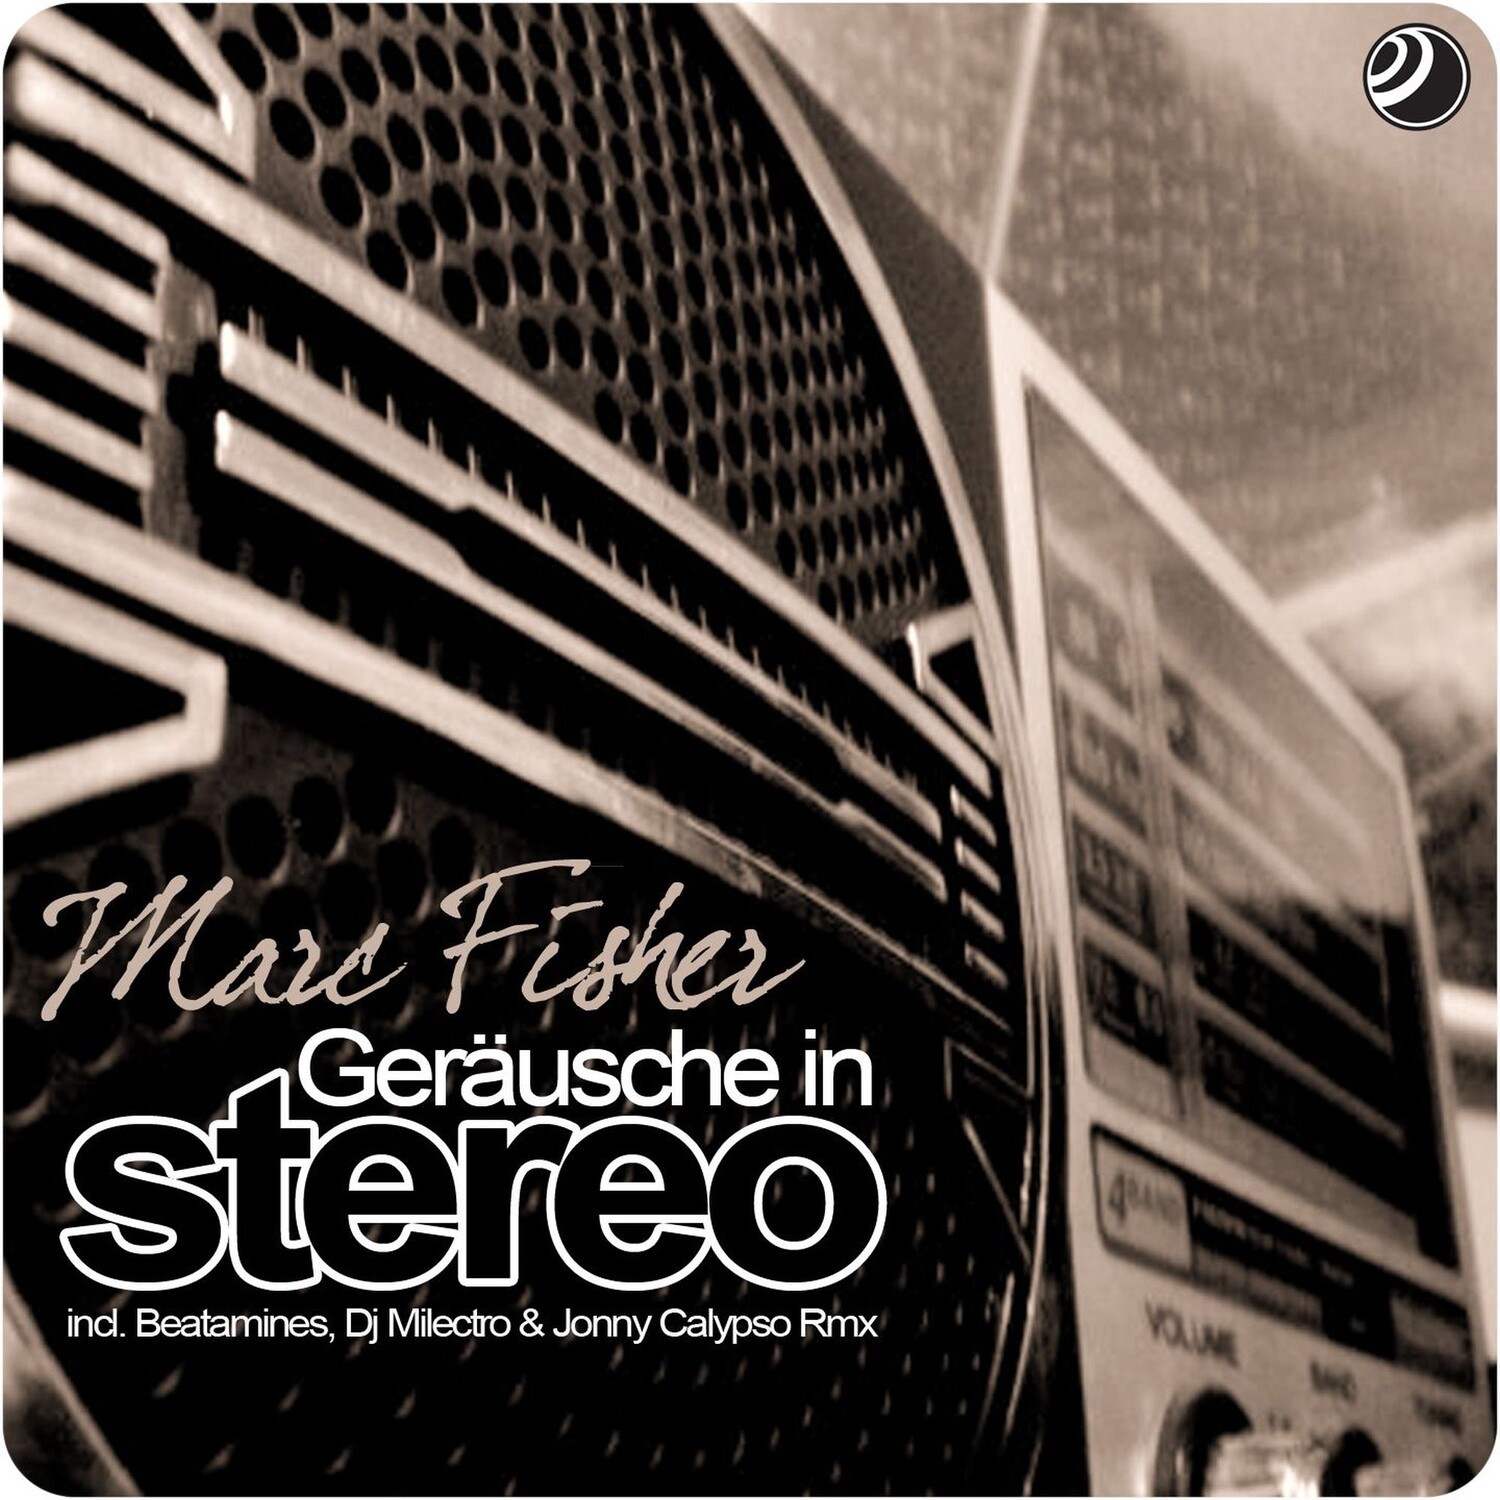 Ger usche in Stereo